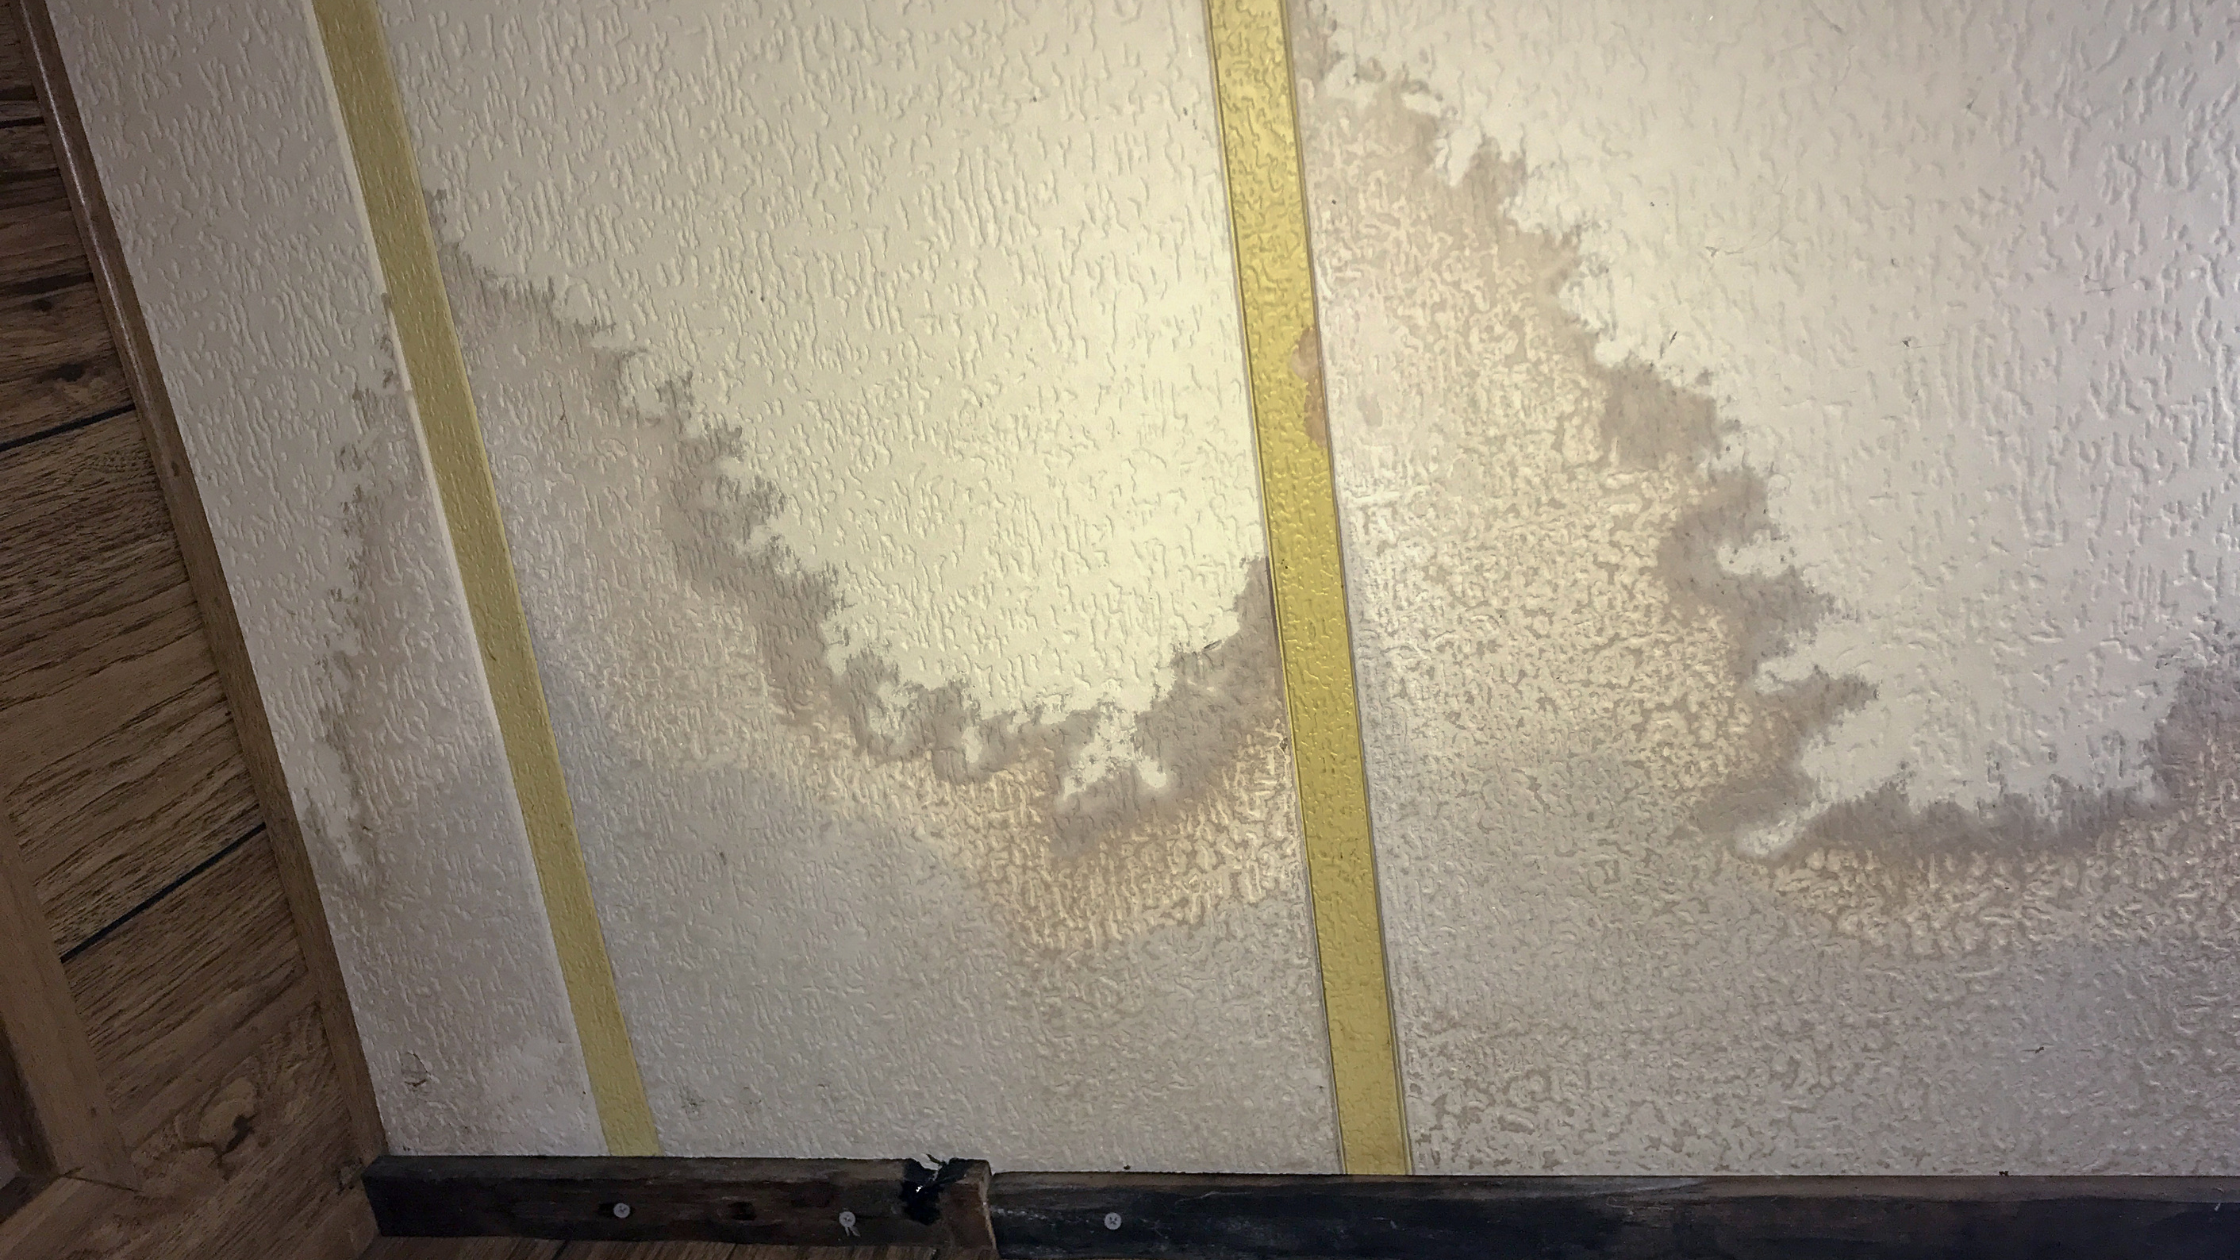 ceiling panels stained and splotchy from a leak above